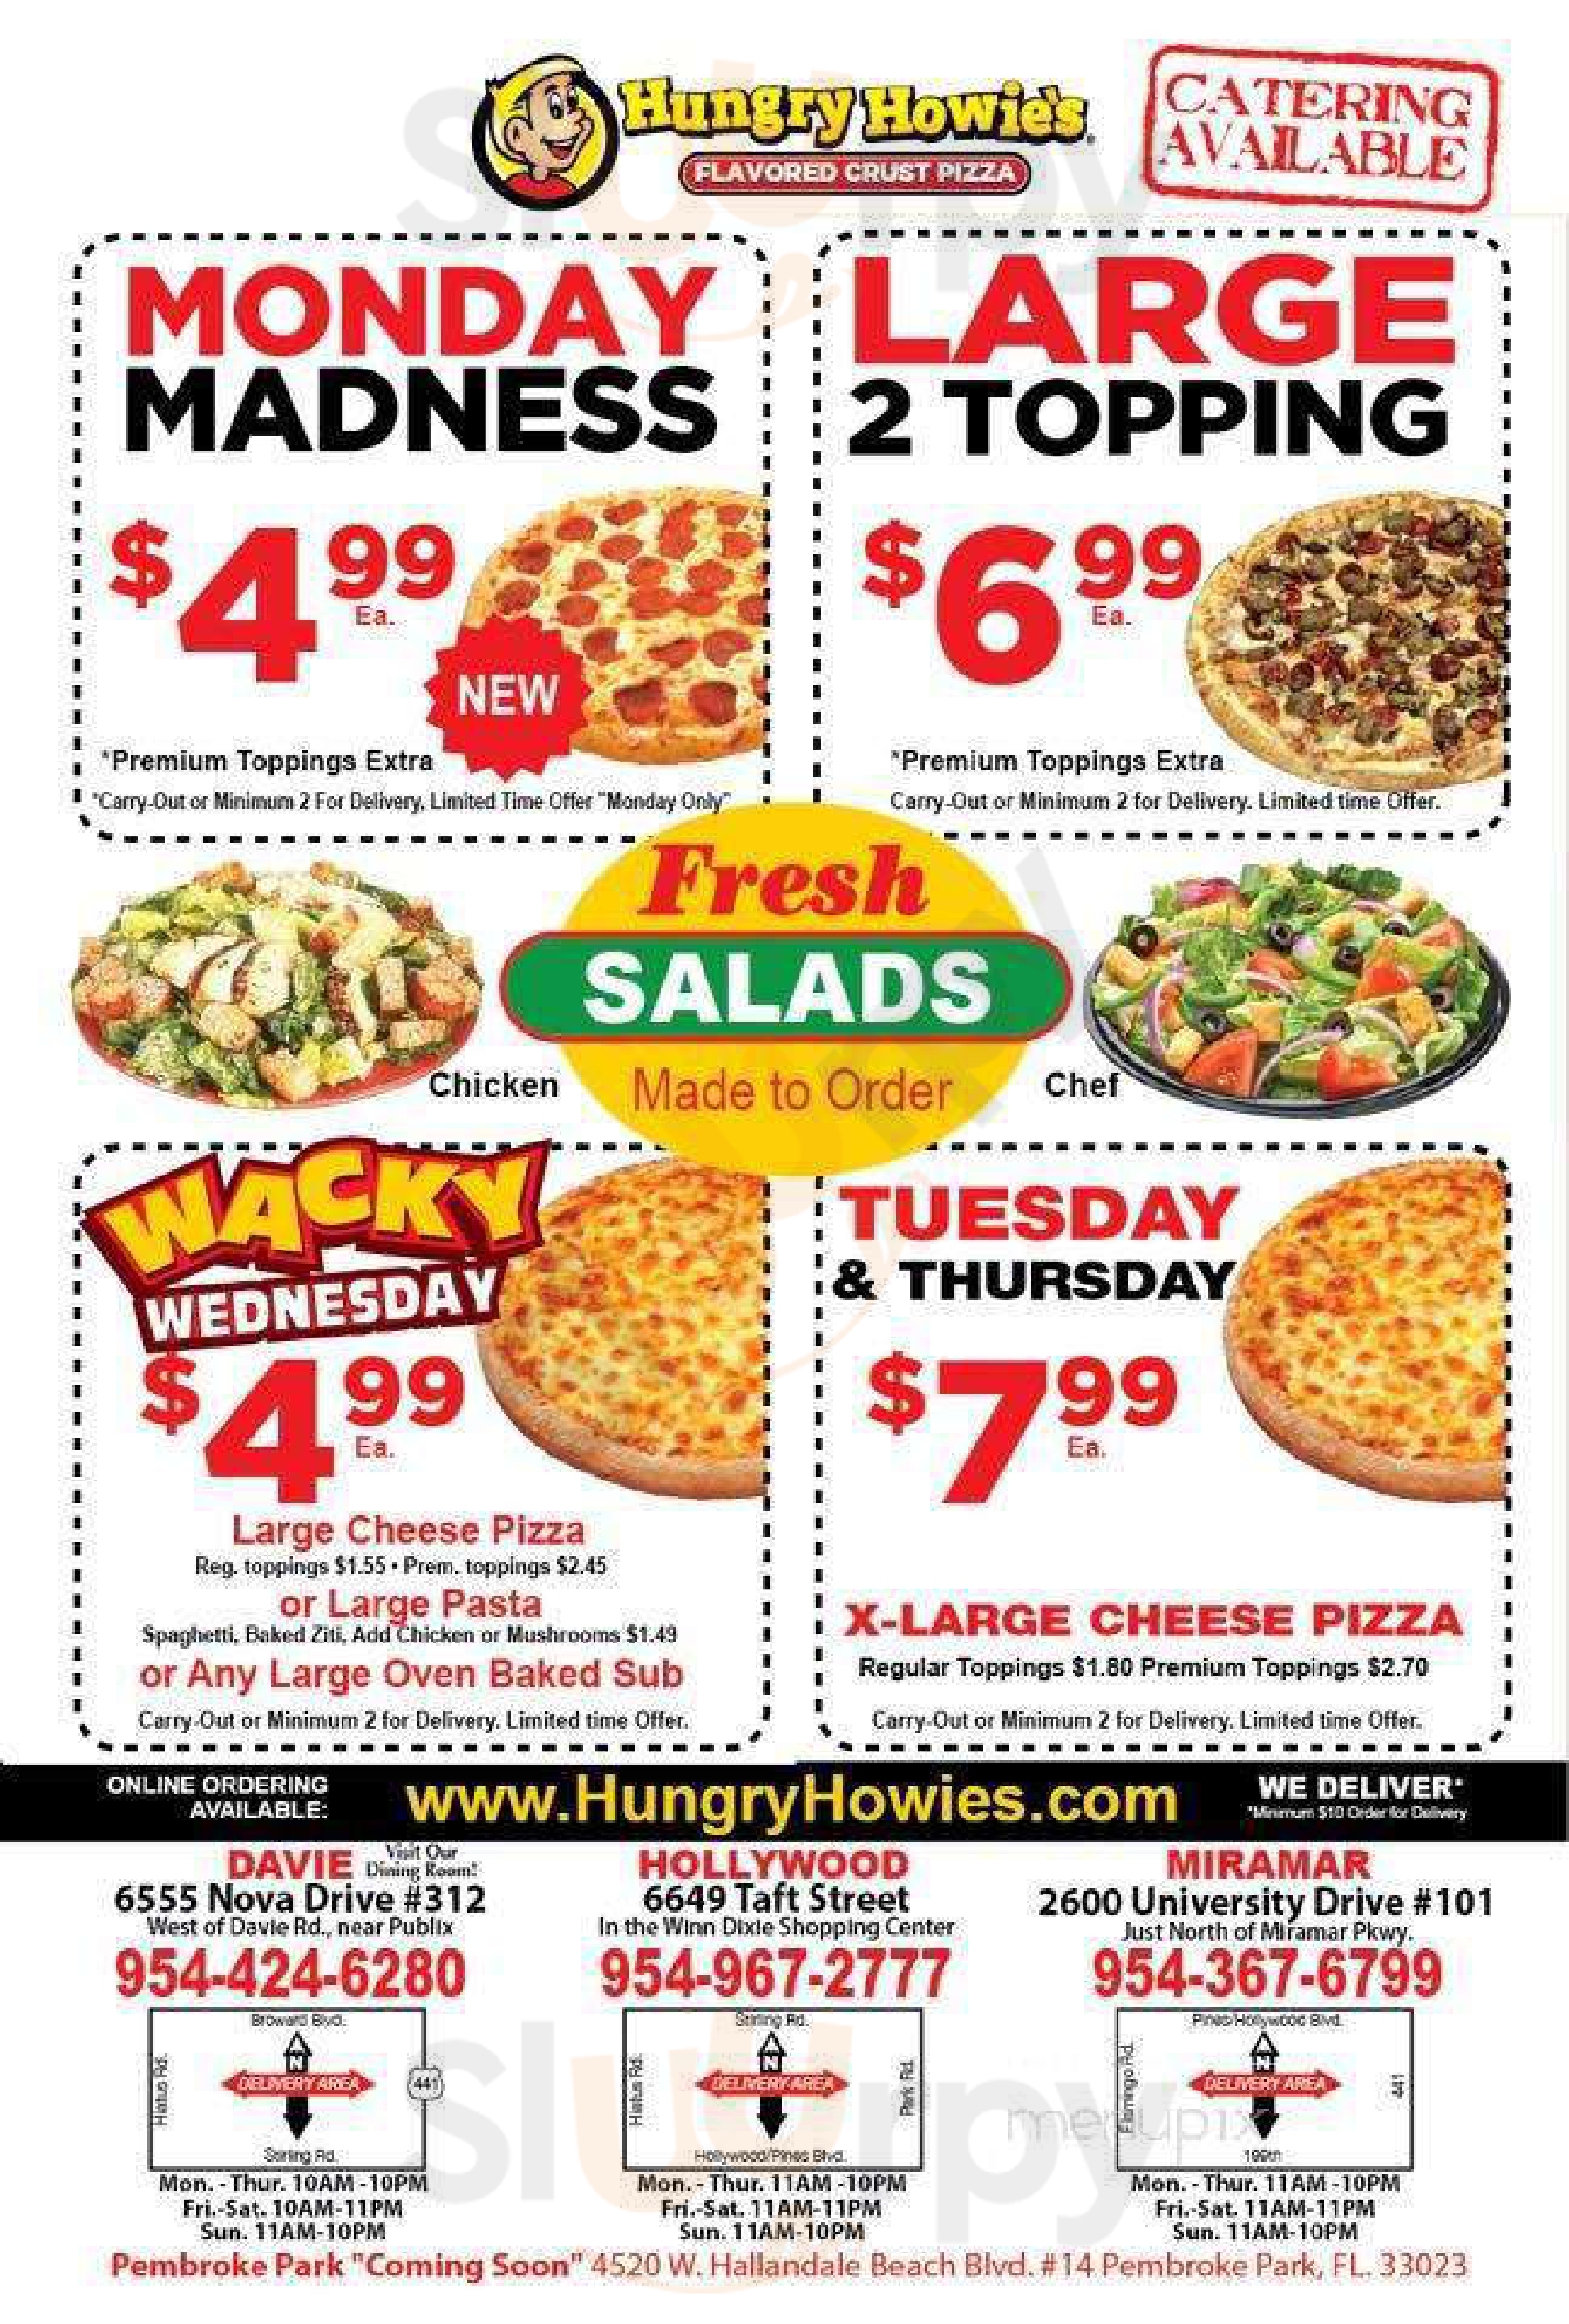 Hungry Howie's Pizza Chesterfield Menu - 1